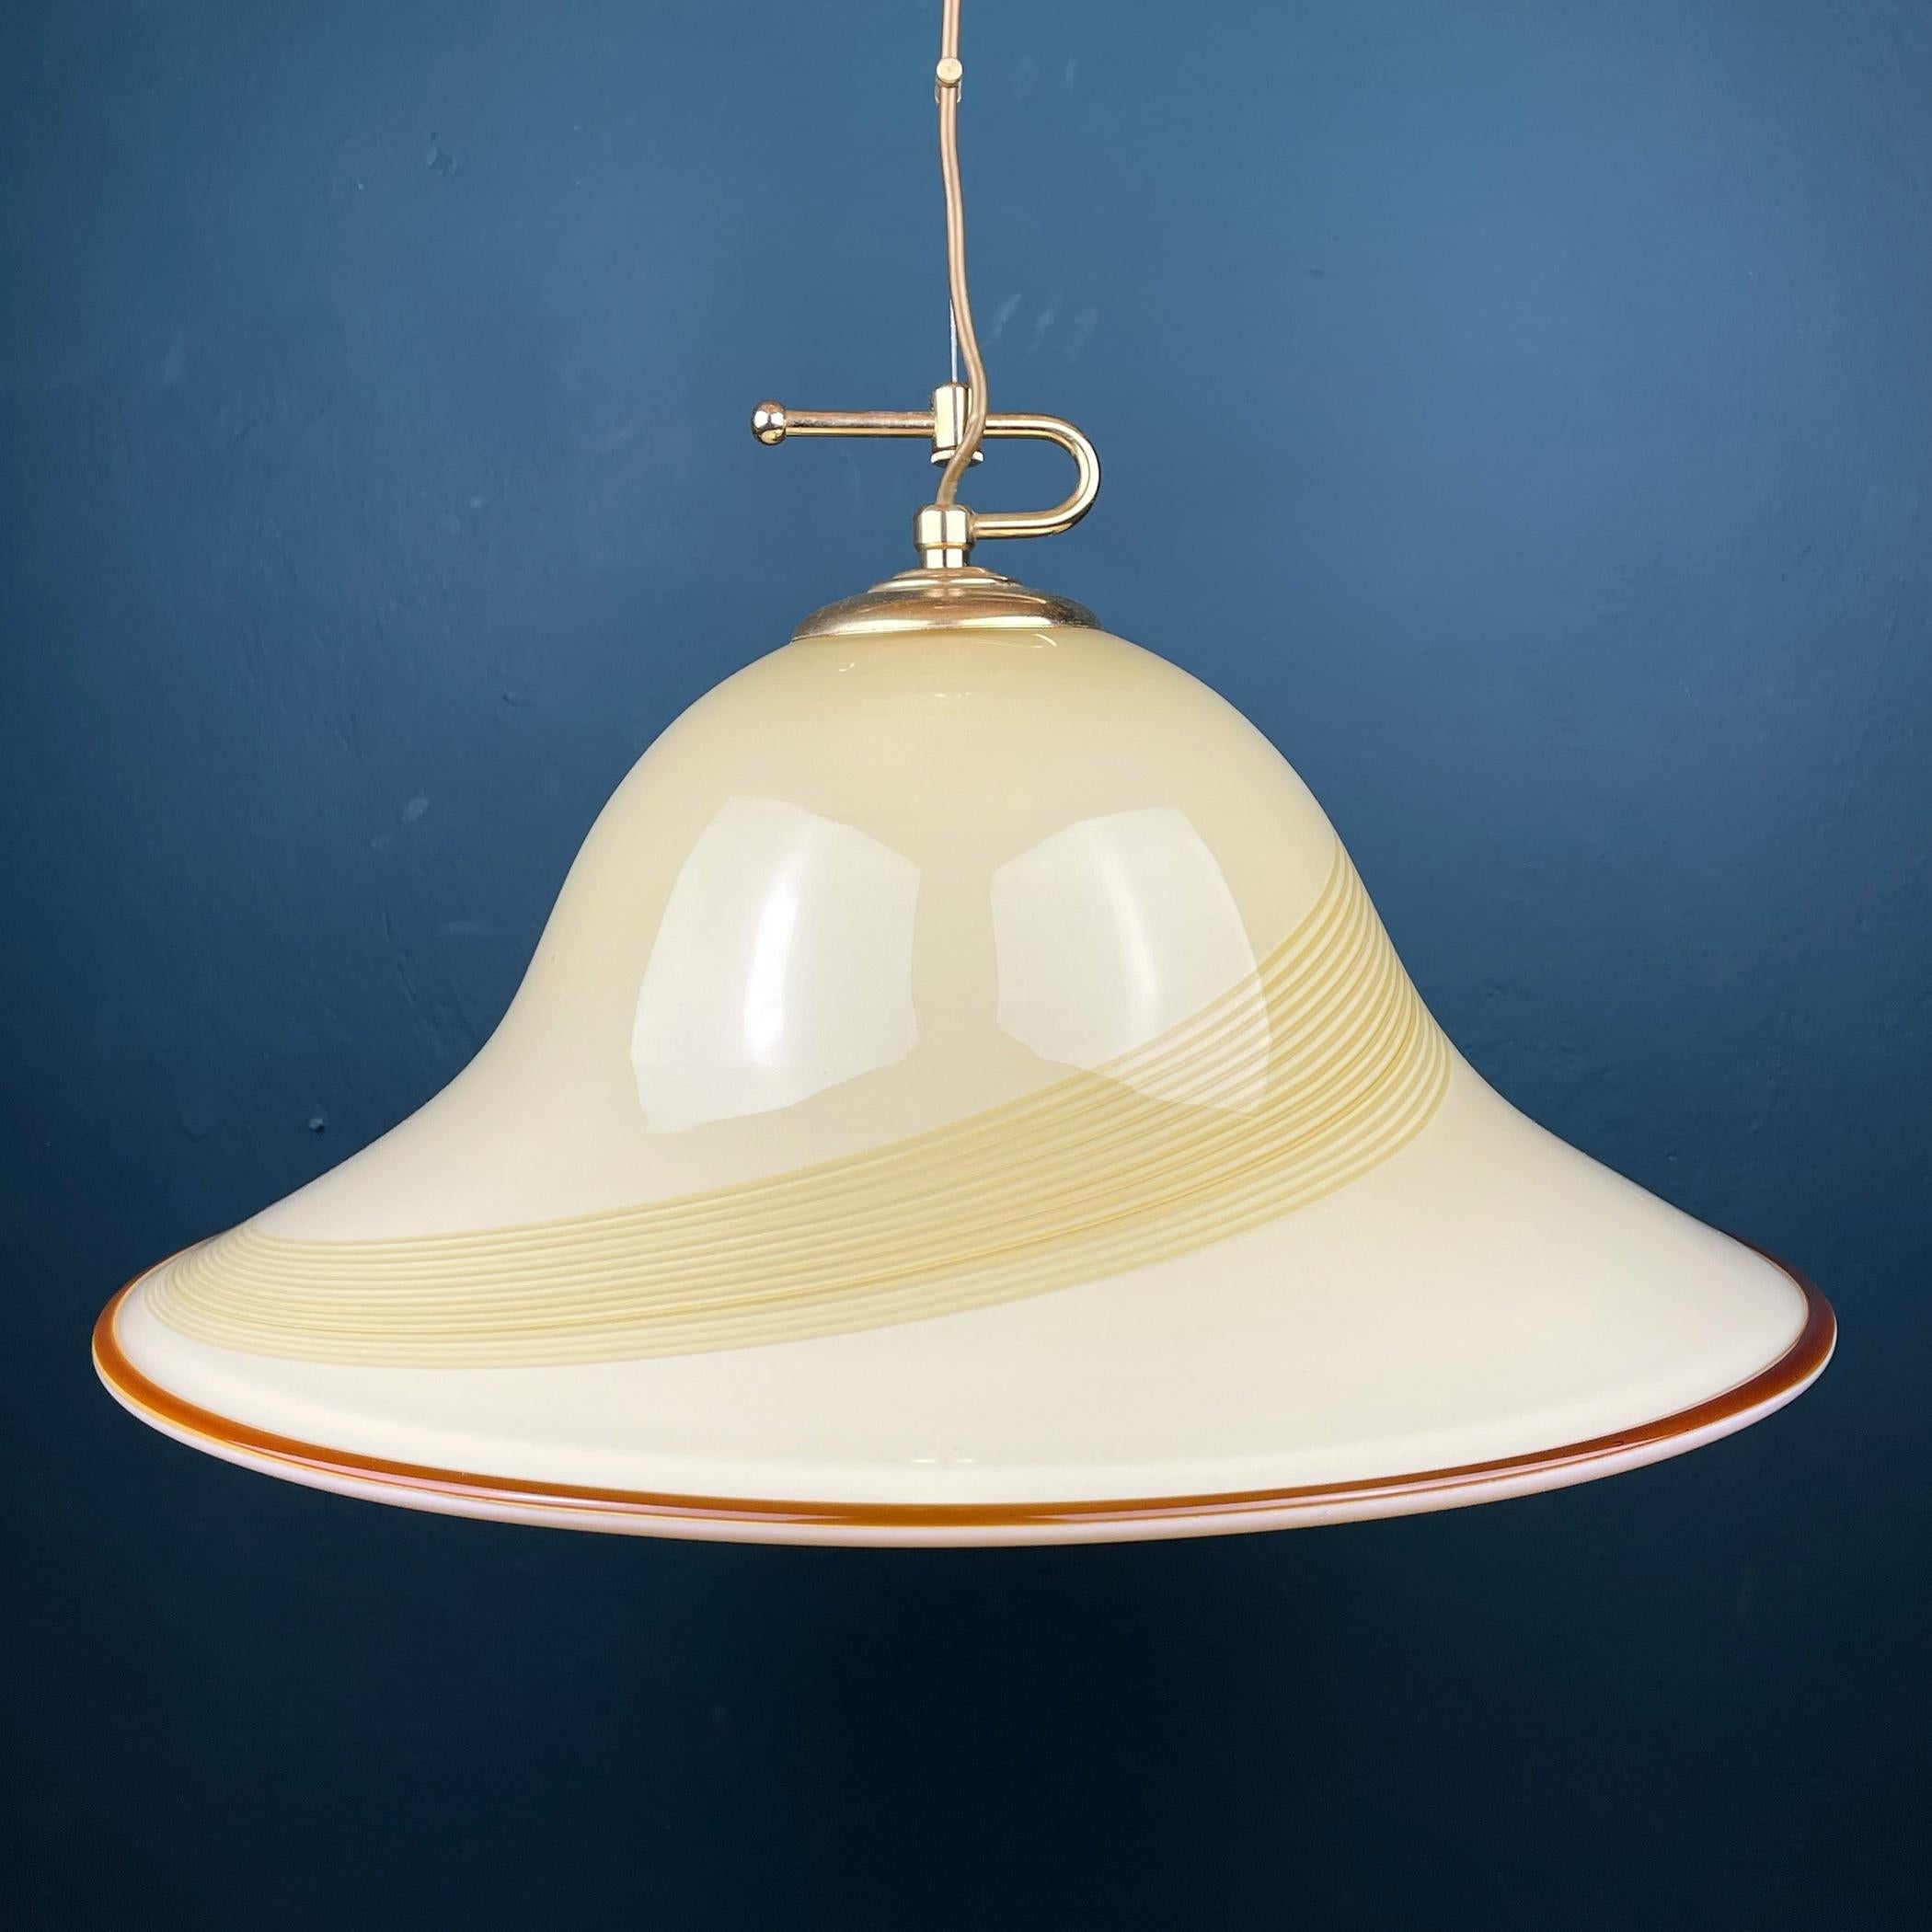 Vintage Beige Murano Glass Pendant Lamp by De Majo, Italy, 1970s For Sale 6